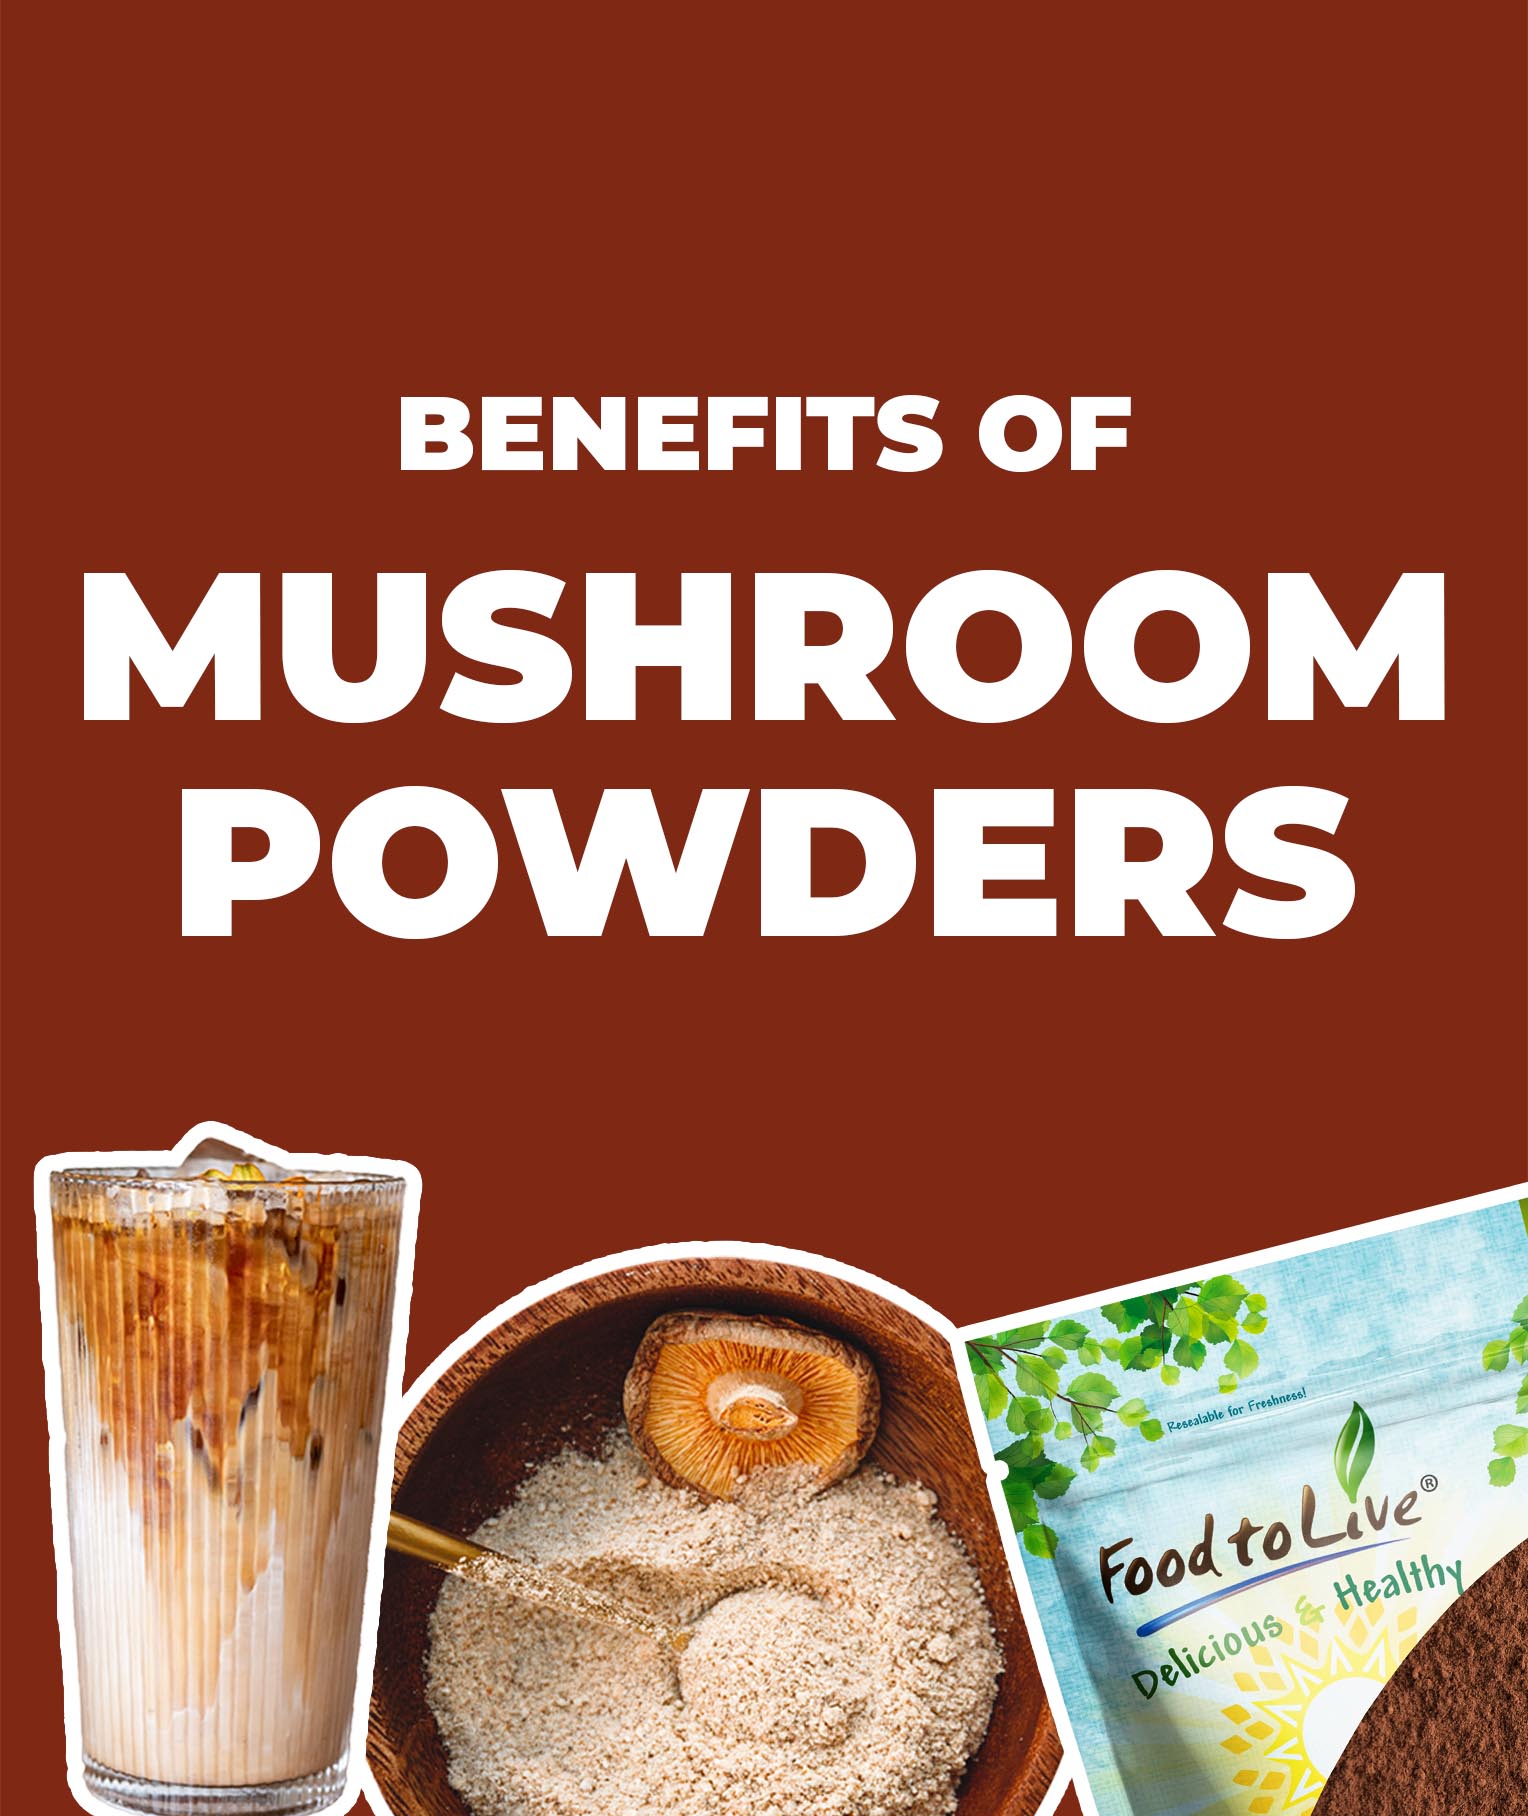 Why You Should Add Mushroom Powder to Your Daily Routine